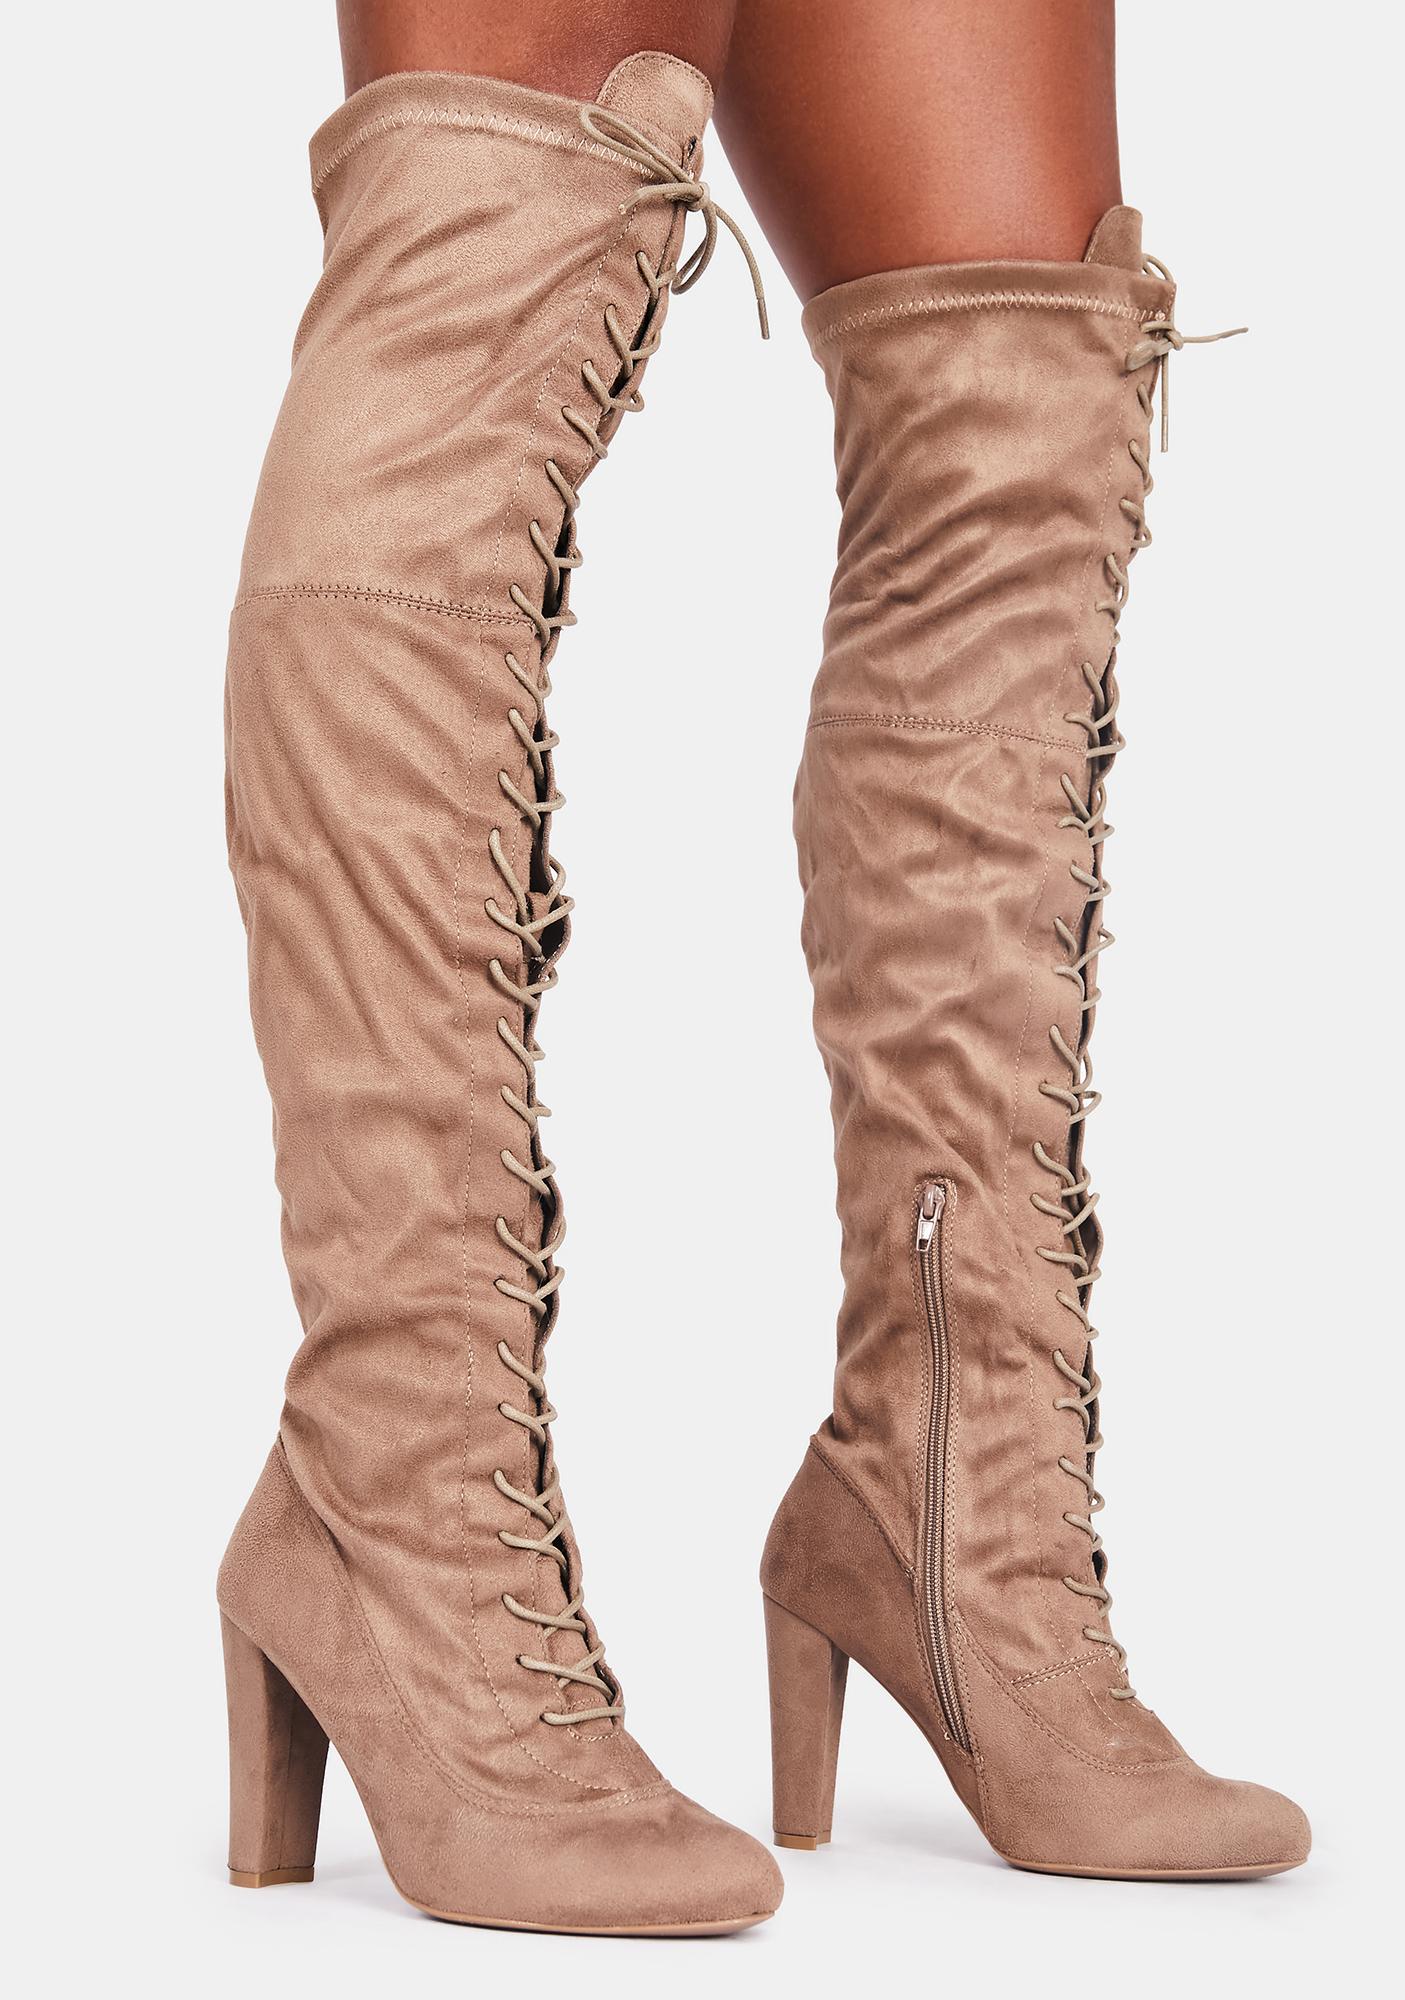 Vegan Suede Lace Up Thigh High Boots 